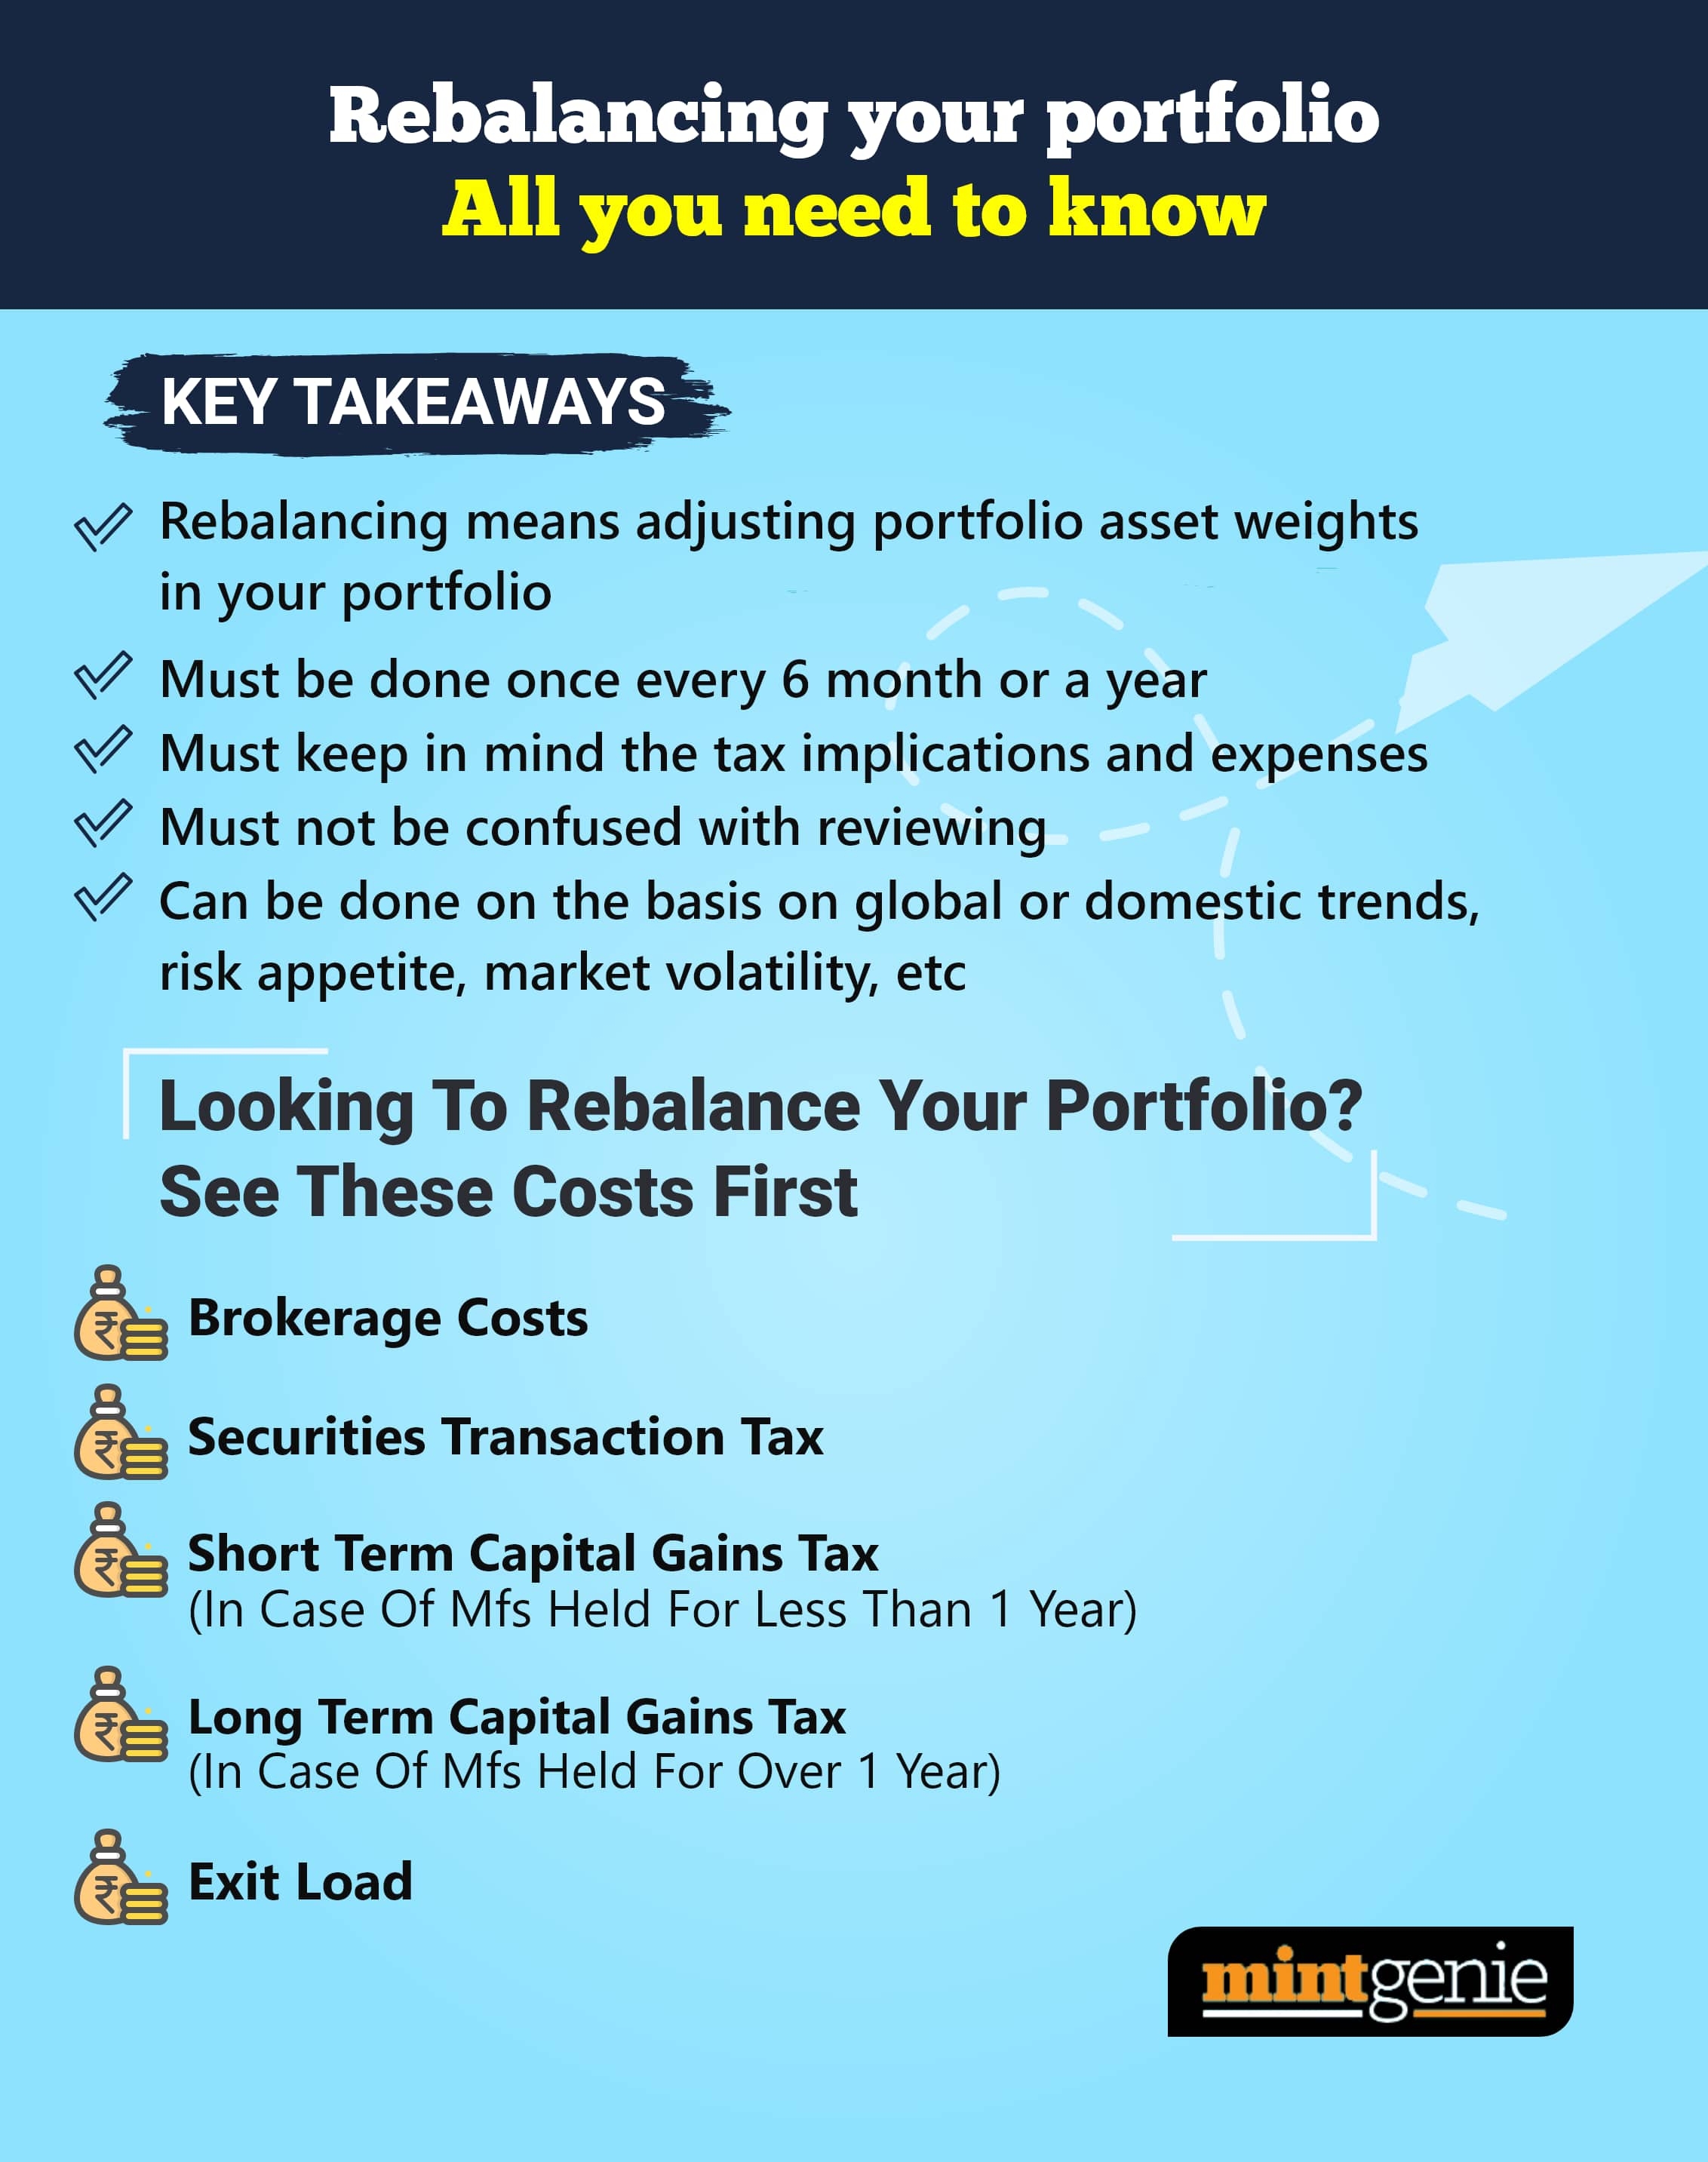 Rebalancing is strictly realigning or readjusting the weights of your assets in your existing portfolio.